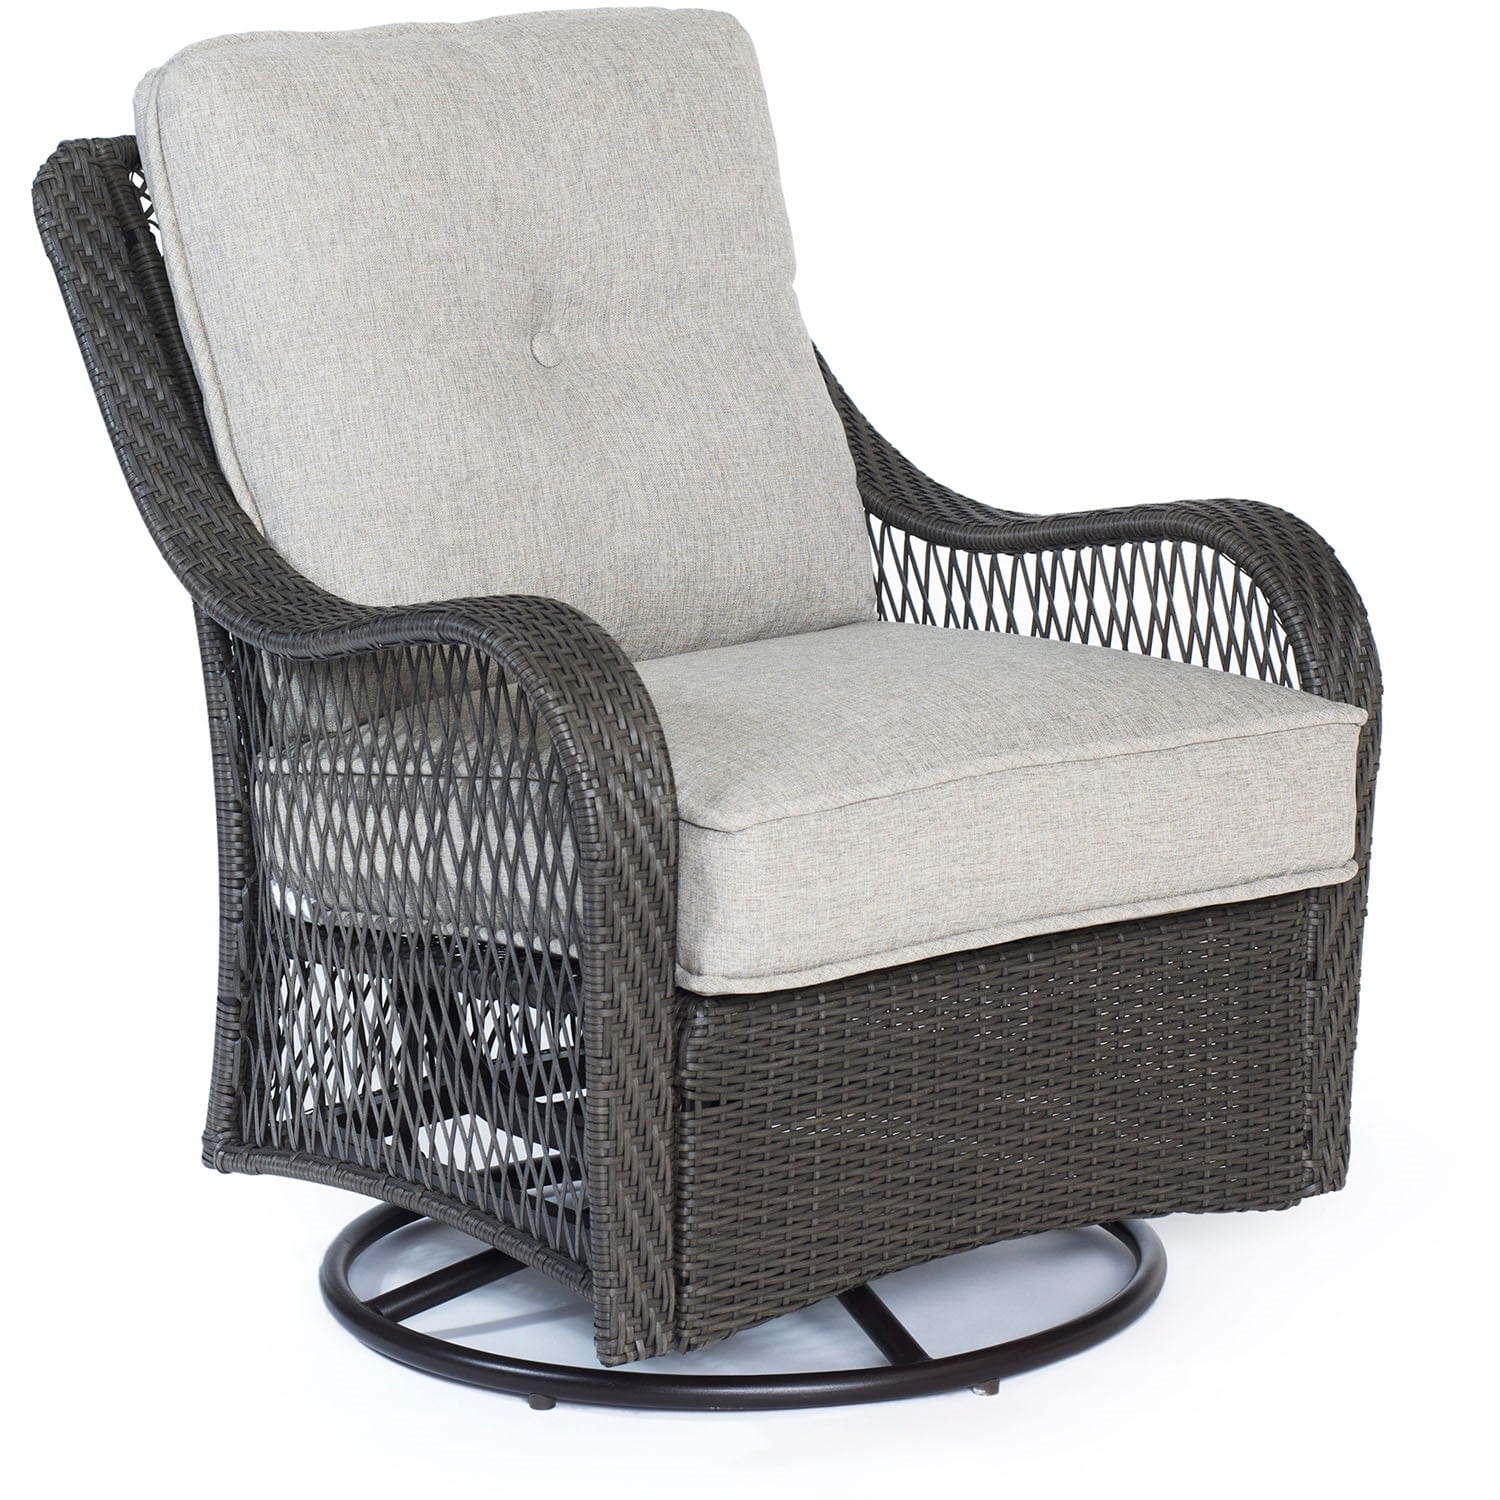 Hanover Conversation Set Hanover - Orleans 4-Piece All-Weather Patio Set in Silver Lining with Gray Weave | 2 Swivel Gliders, Sofa, Coffee Table | ORLEANS4PCSW-G-SLV